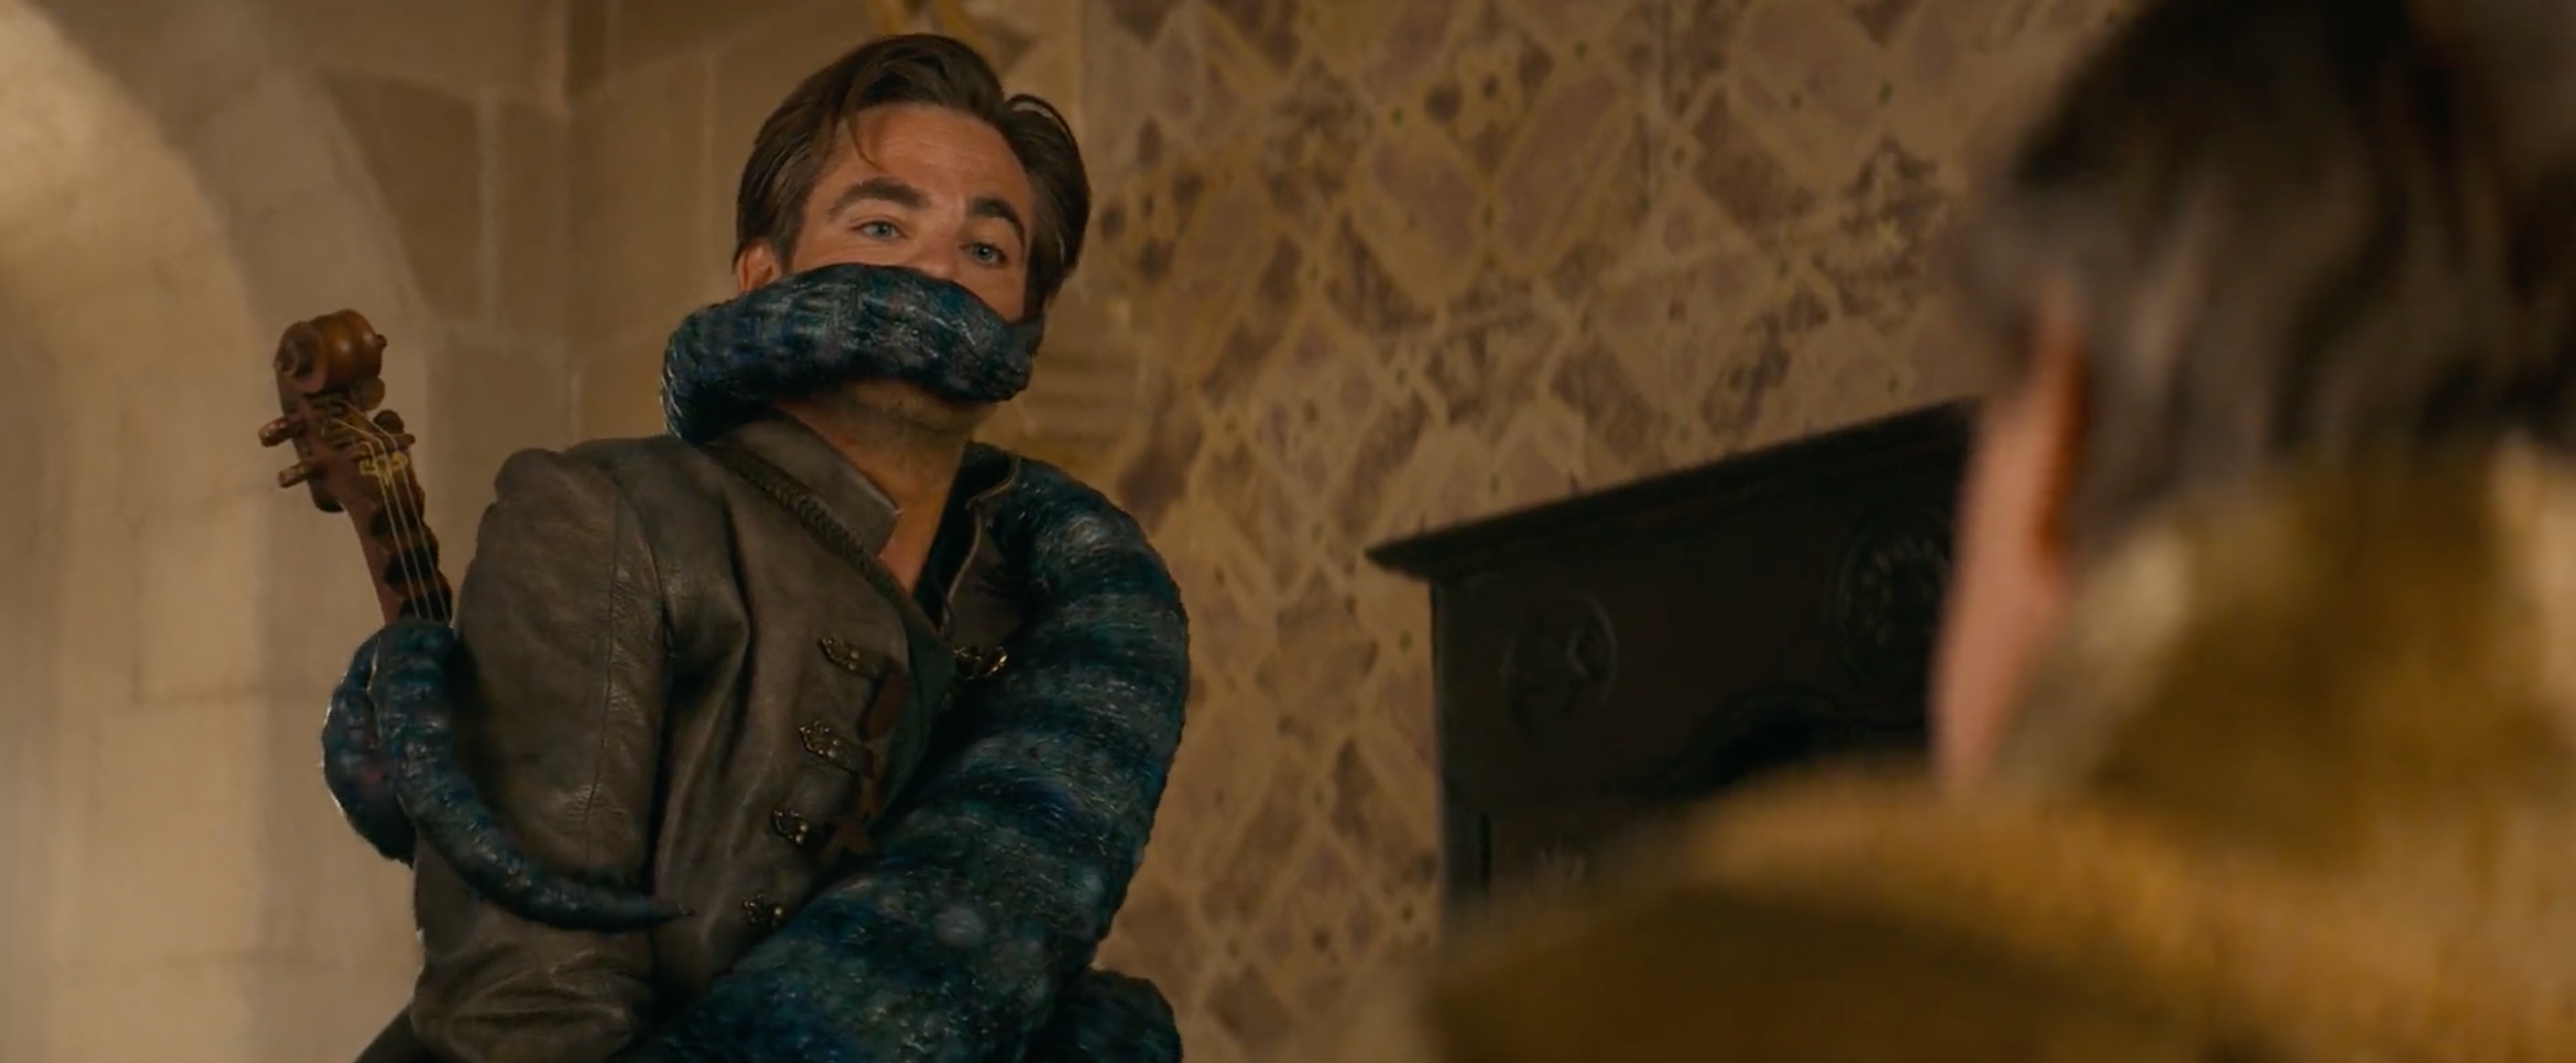 dungeons-and-dragons-honor-among-thieves-chris-pine